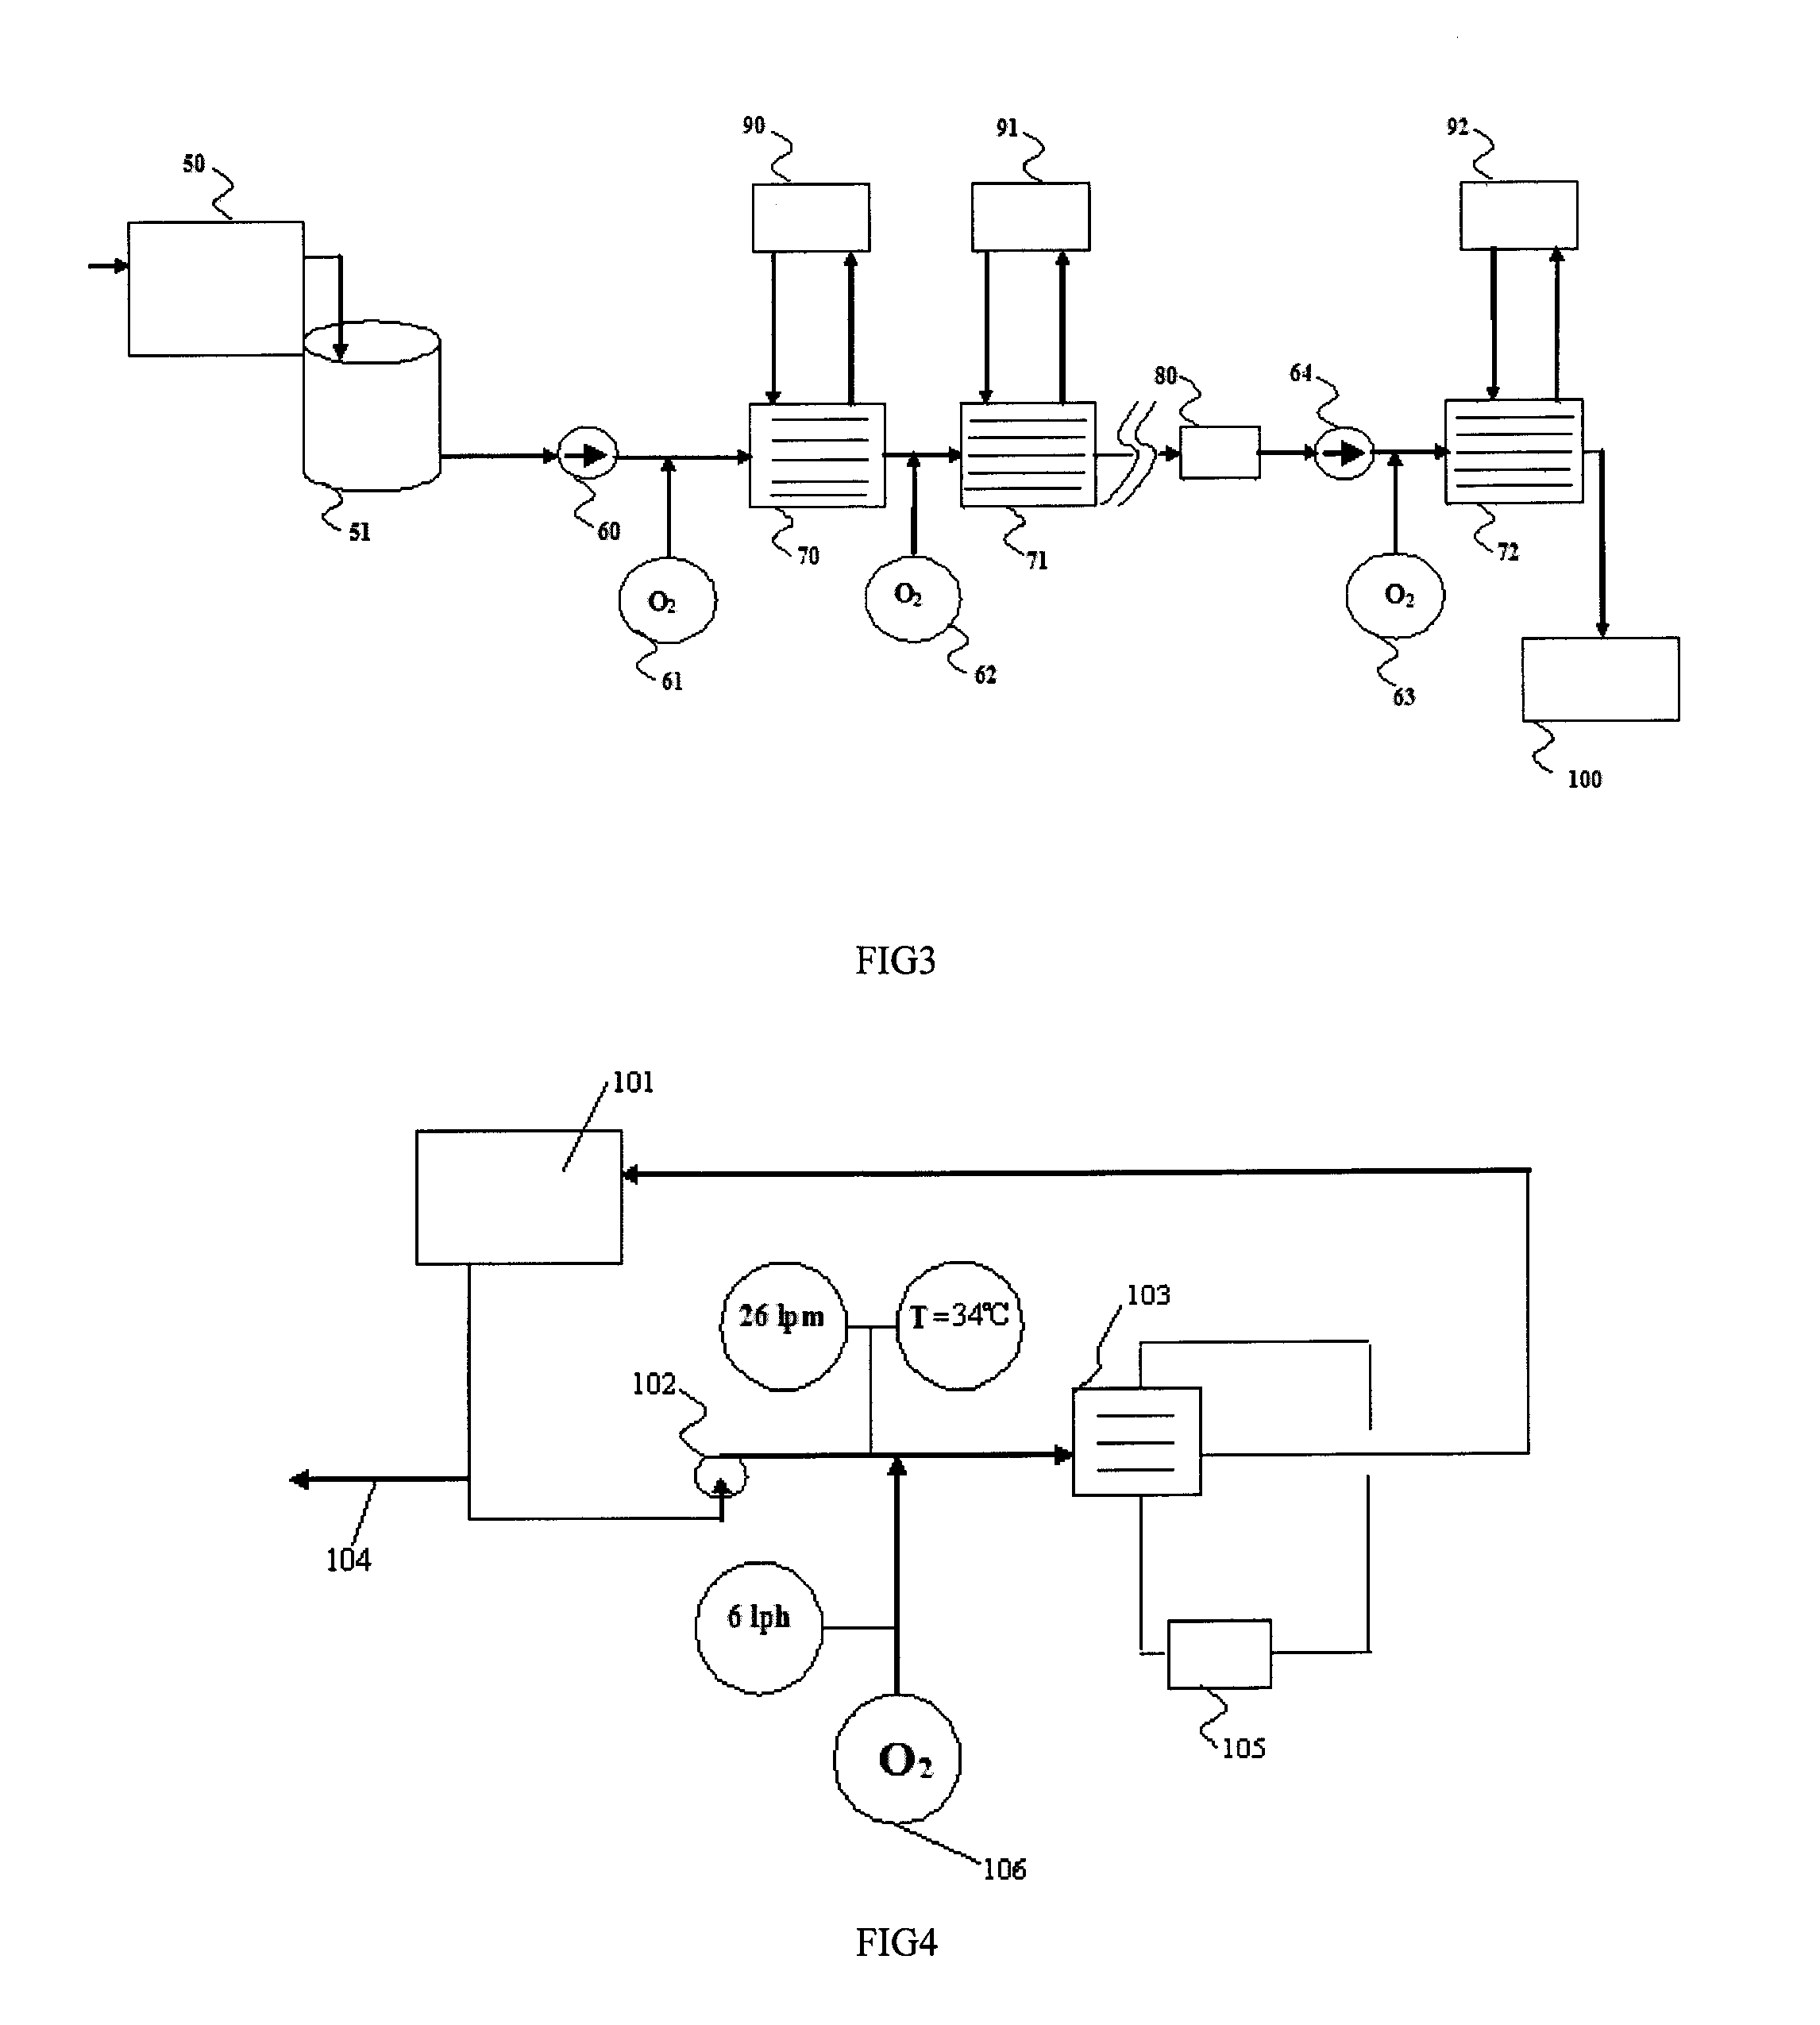 Wastewater treatment process by electrochemical apparatus